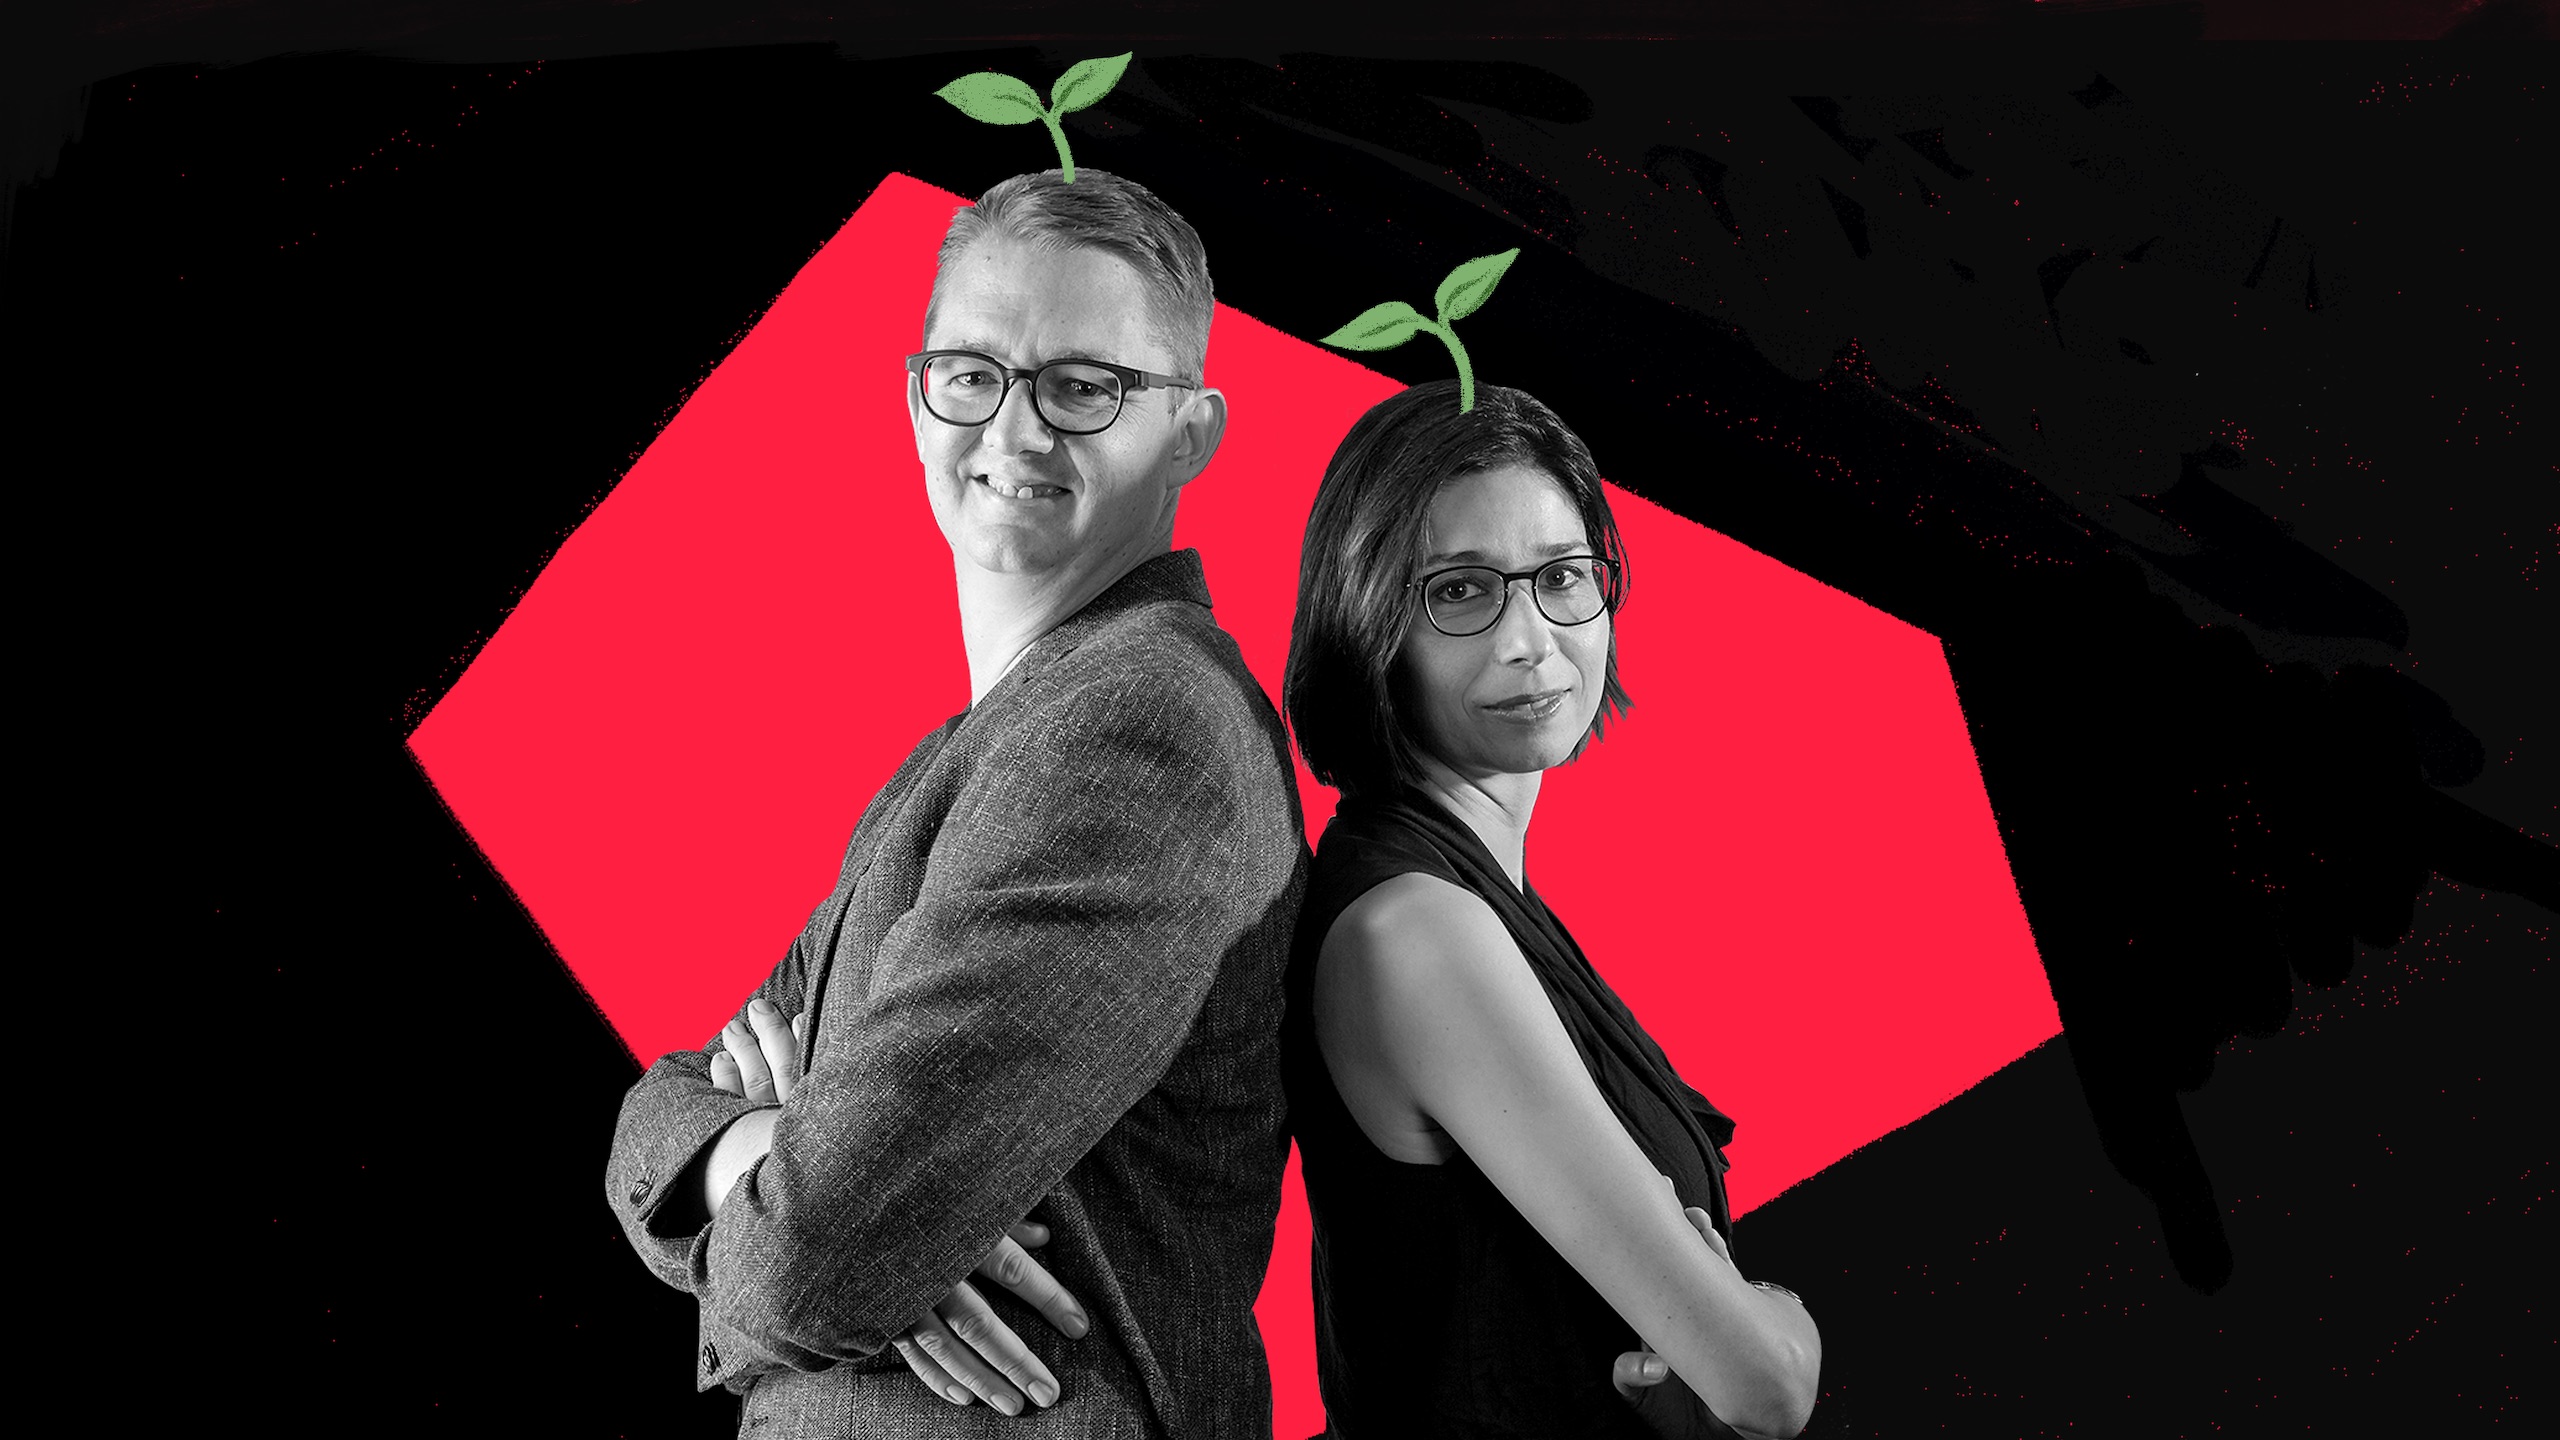 black and white photo of two people standing back to back, behind them is a red shape and above their heads are stylised plant emojis